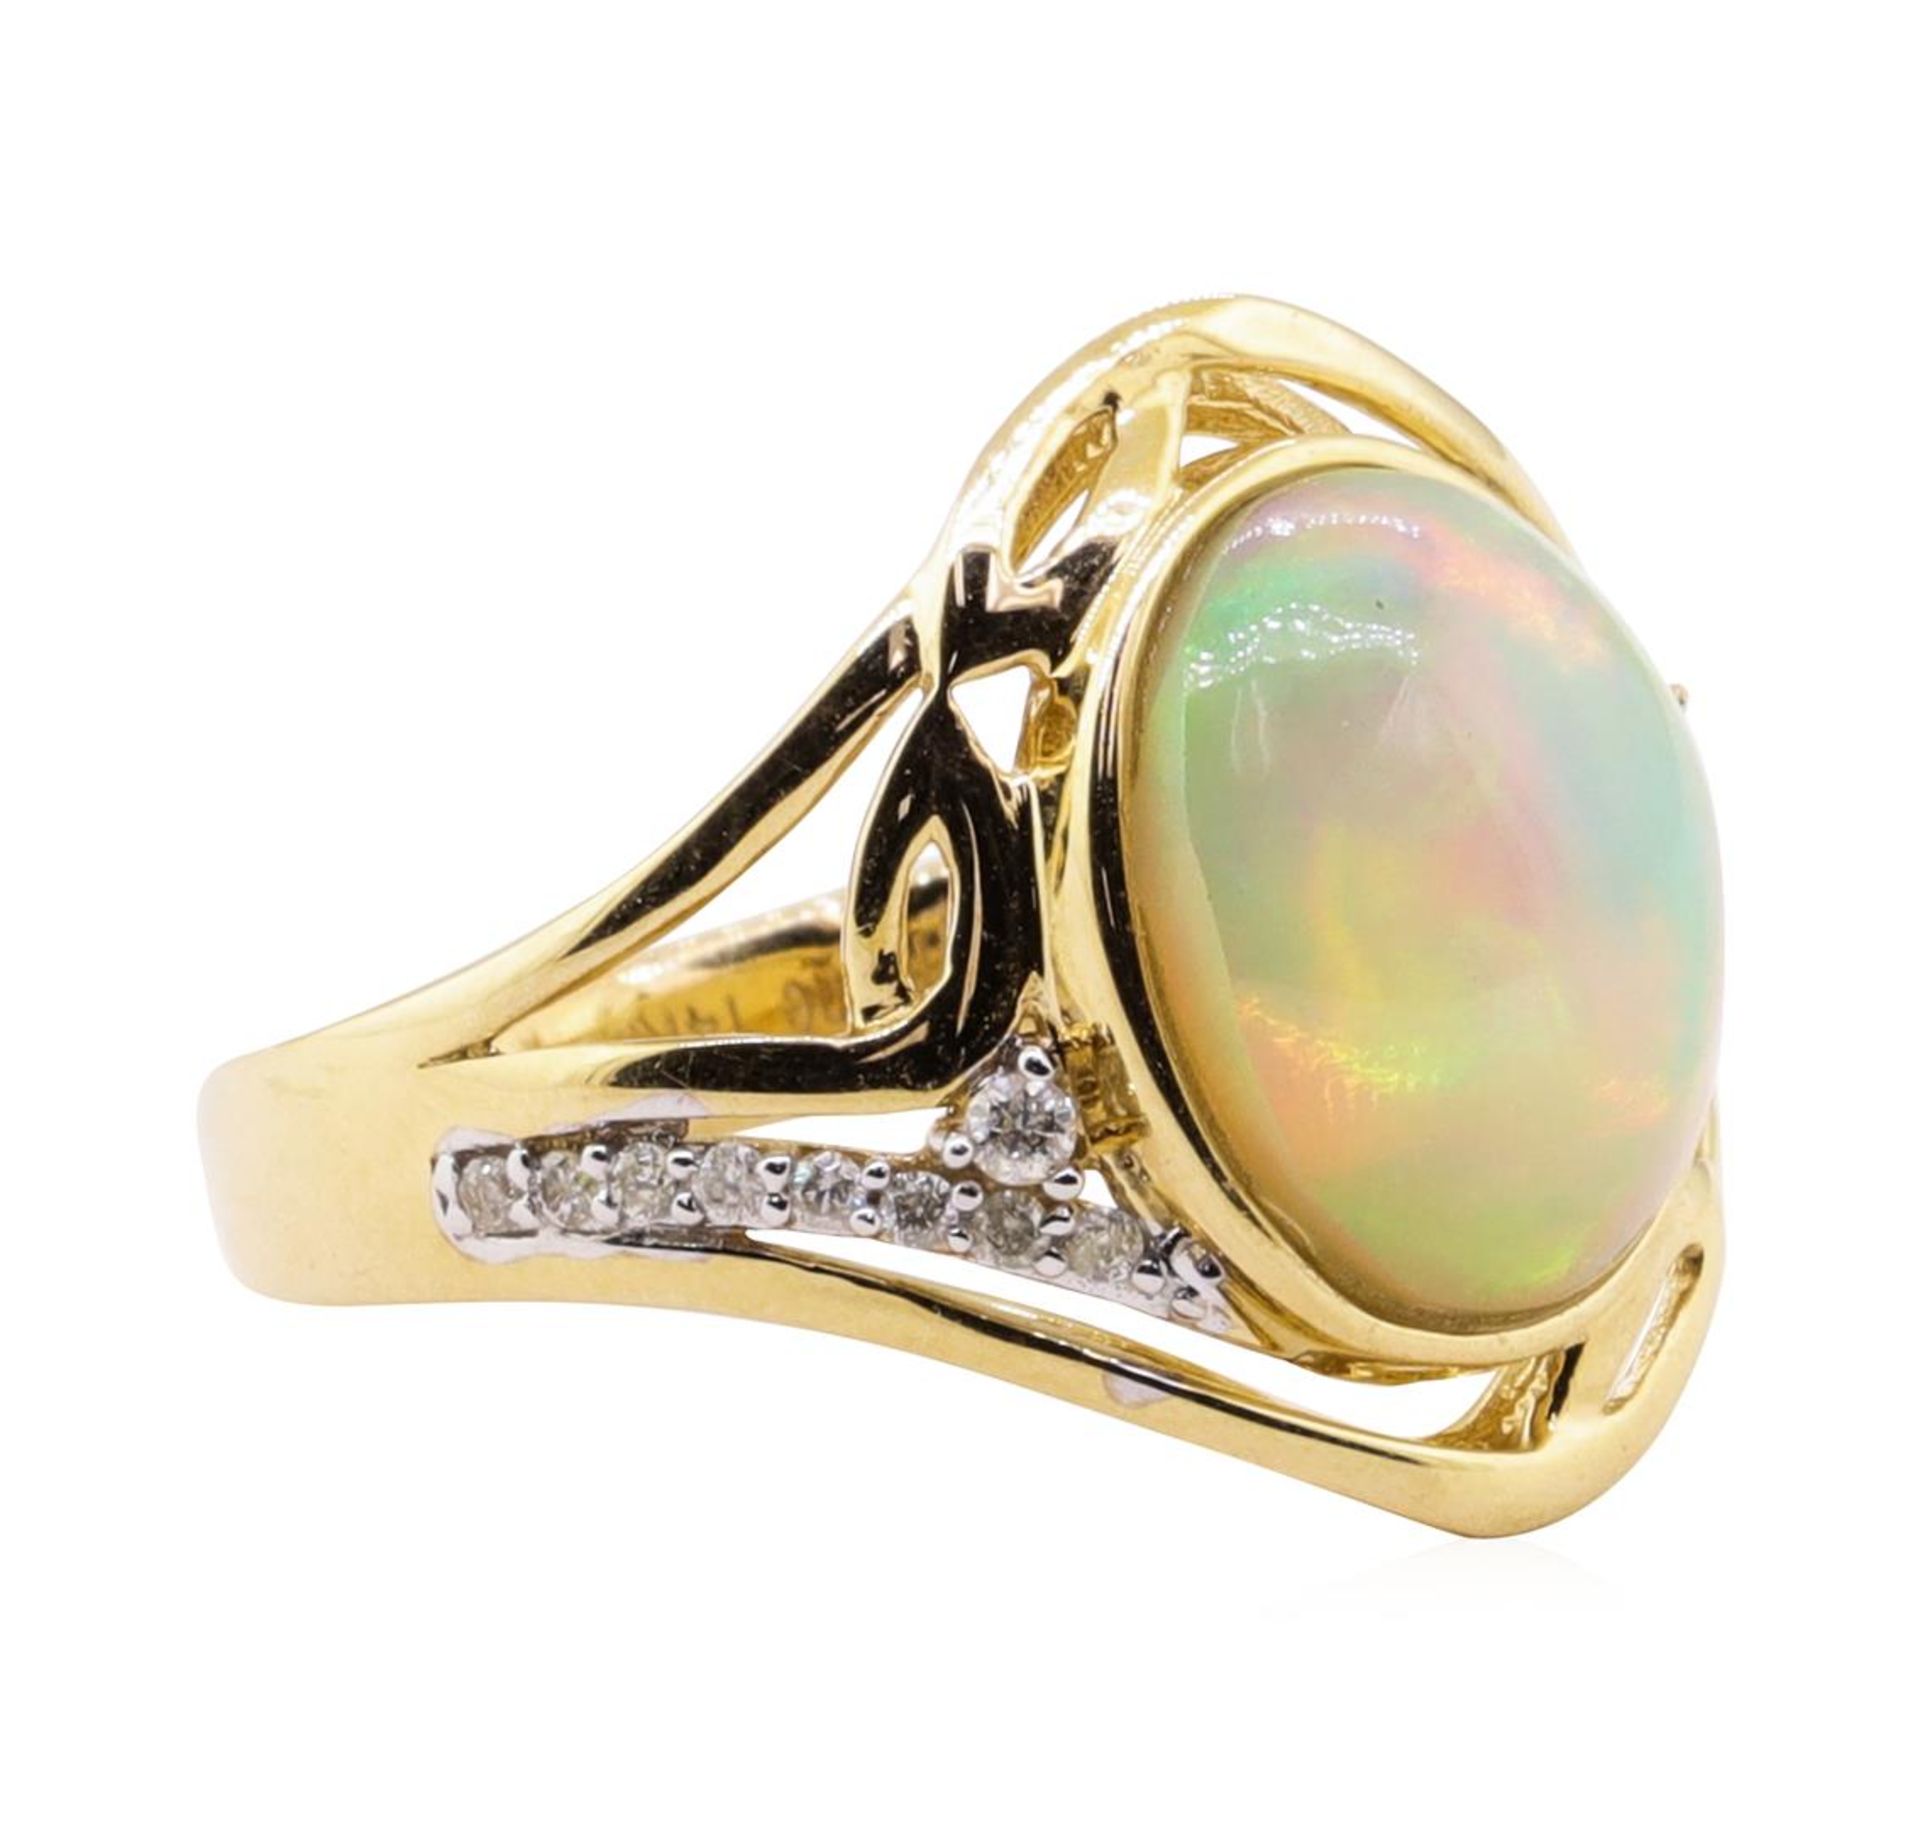 3.12ct Opal and Diamond Ring - 14KT Yellow Gold - Image 2 of 5